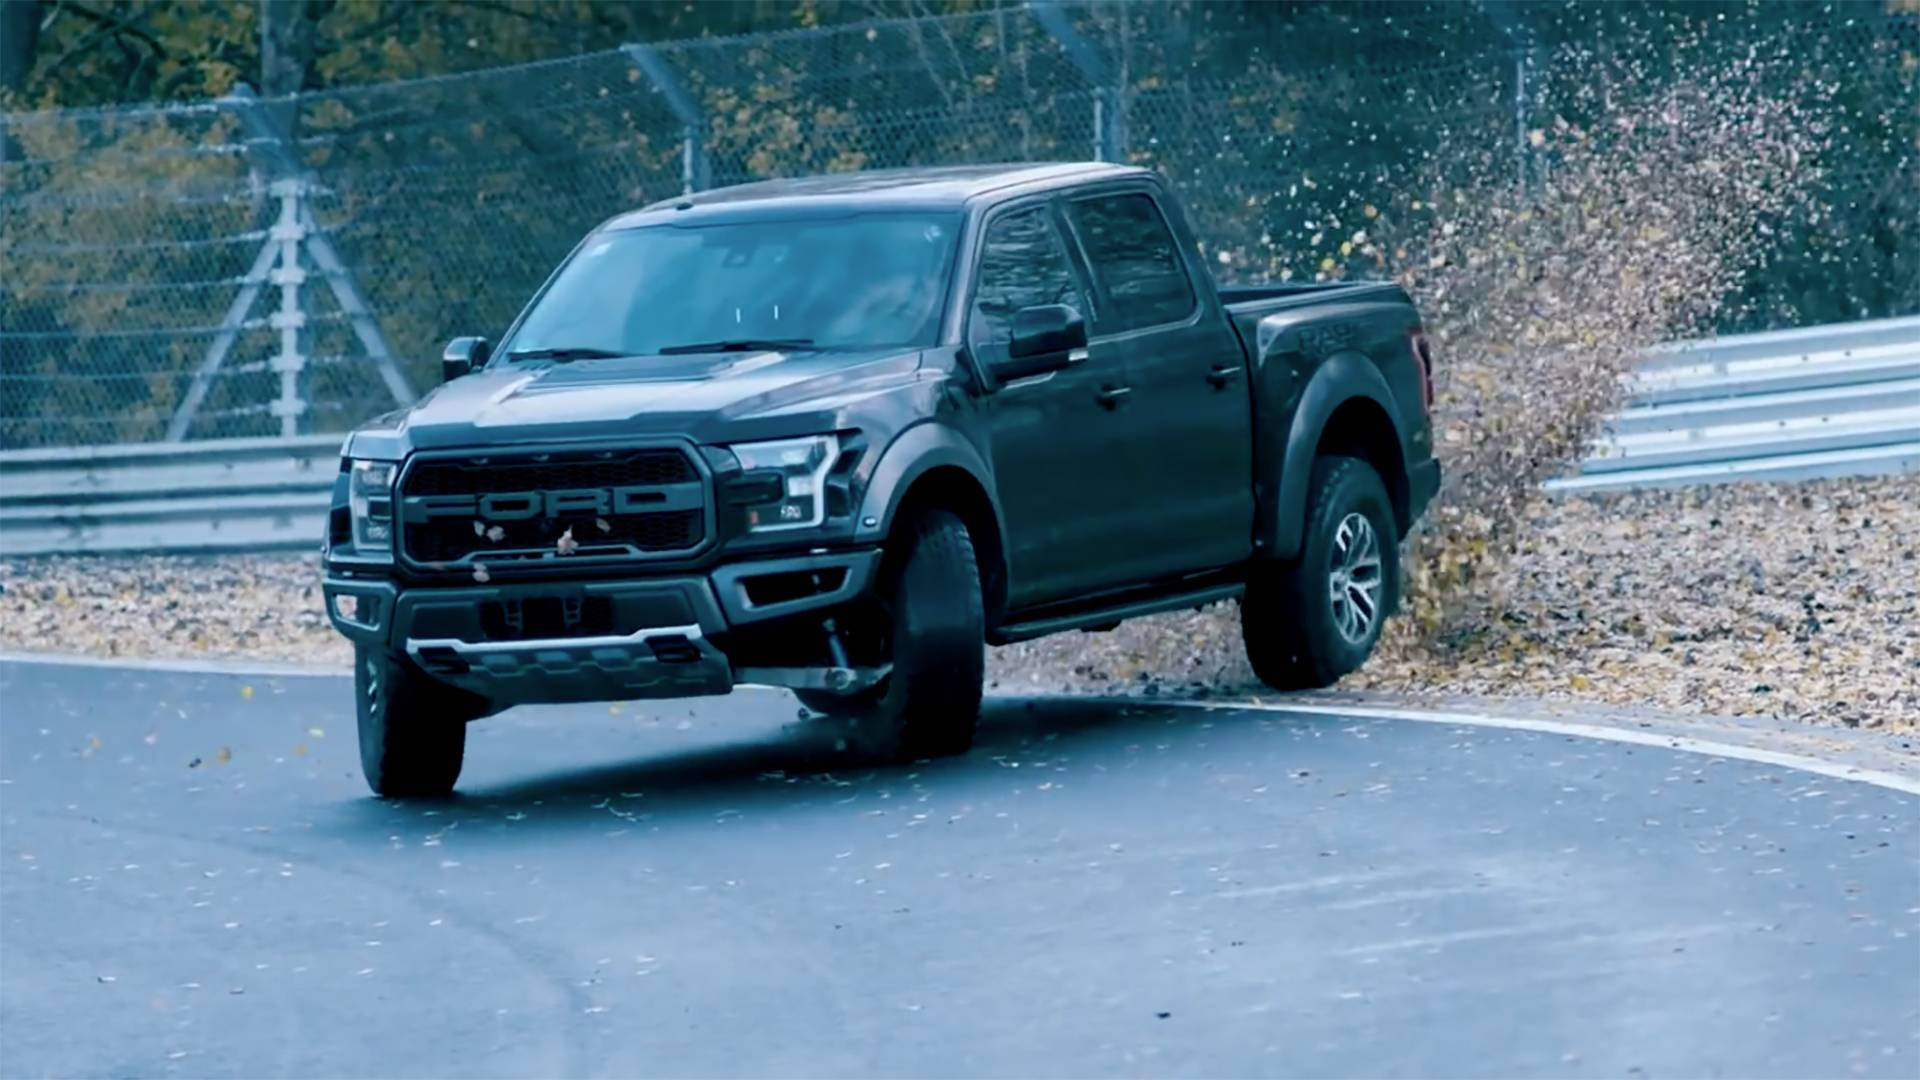 Ford F-150 Raptor - A Black Truck Driving On A Track